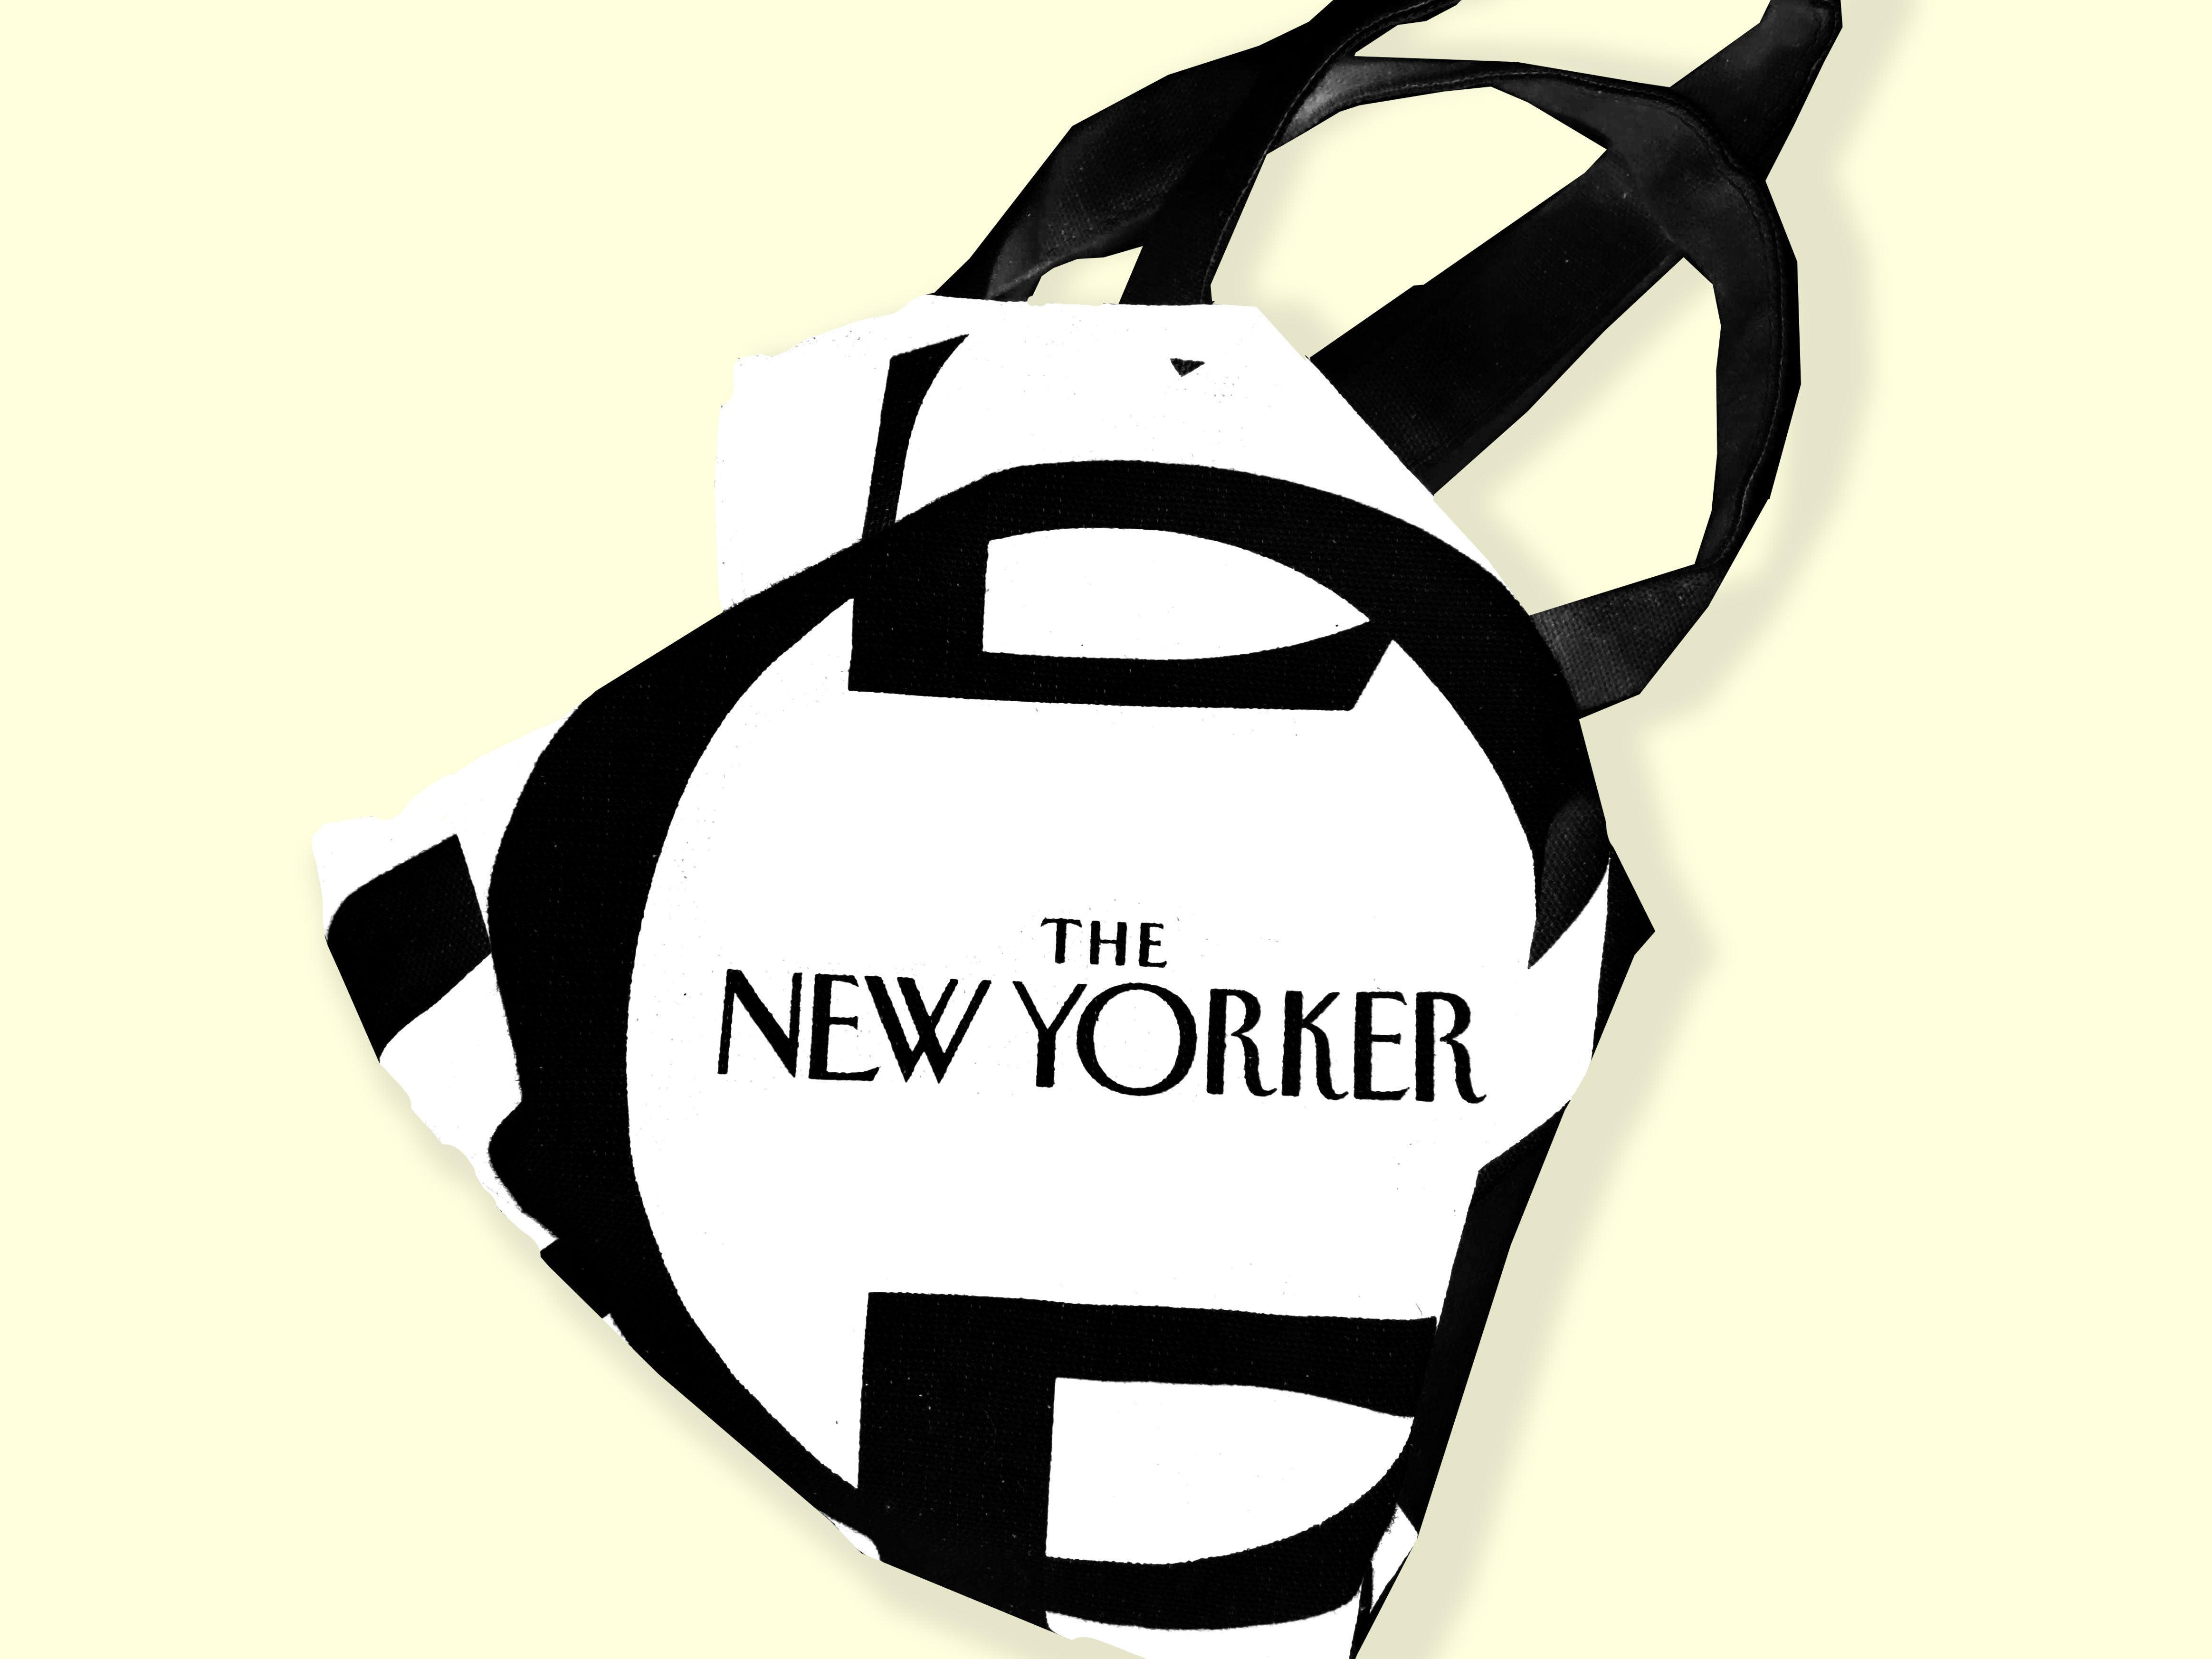 The New Yorker tote bag is not a good 